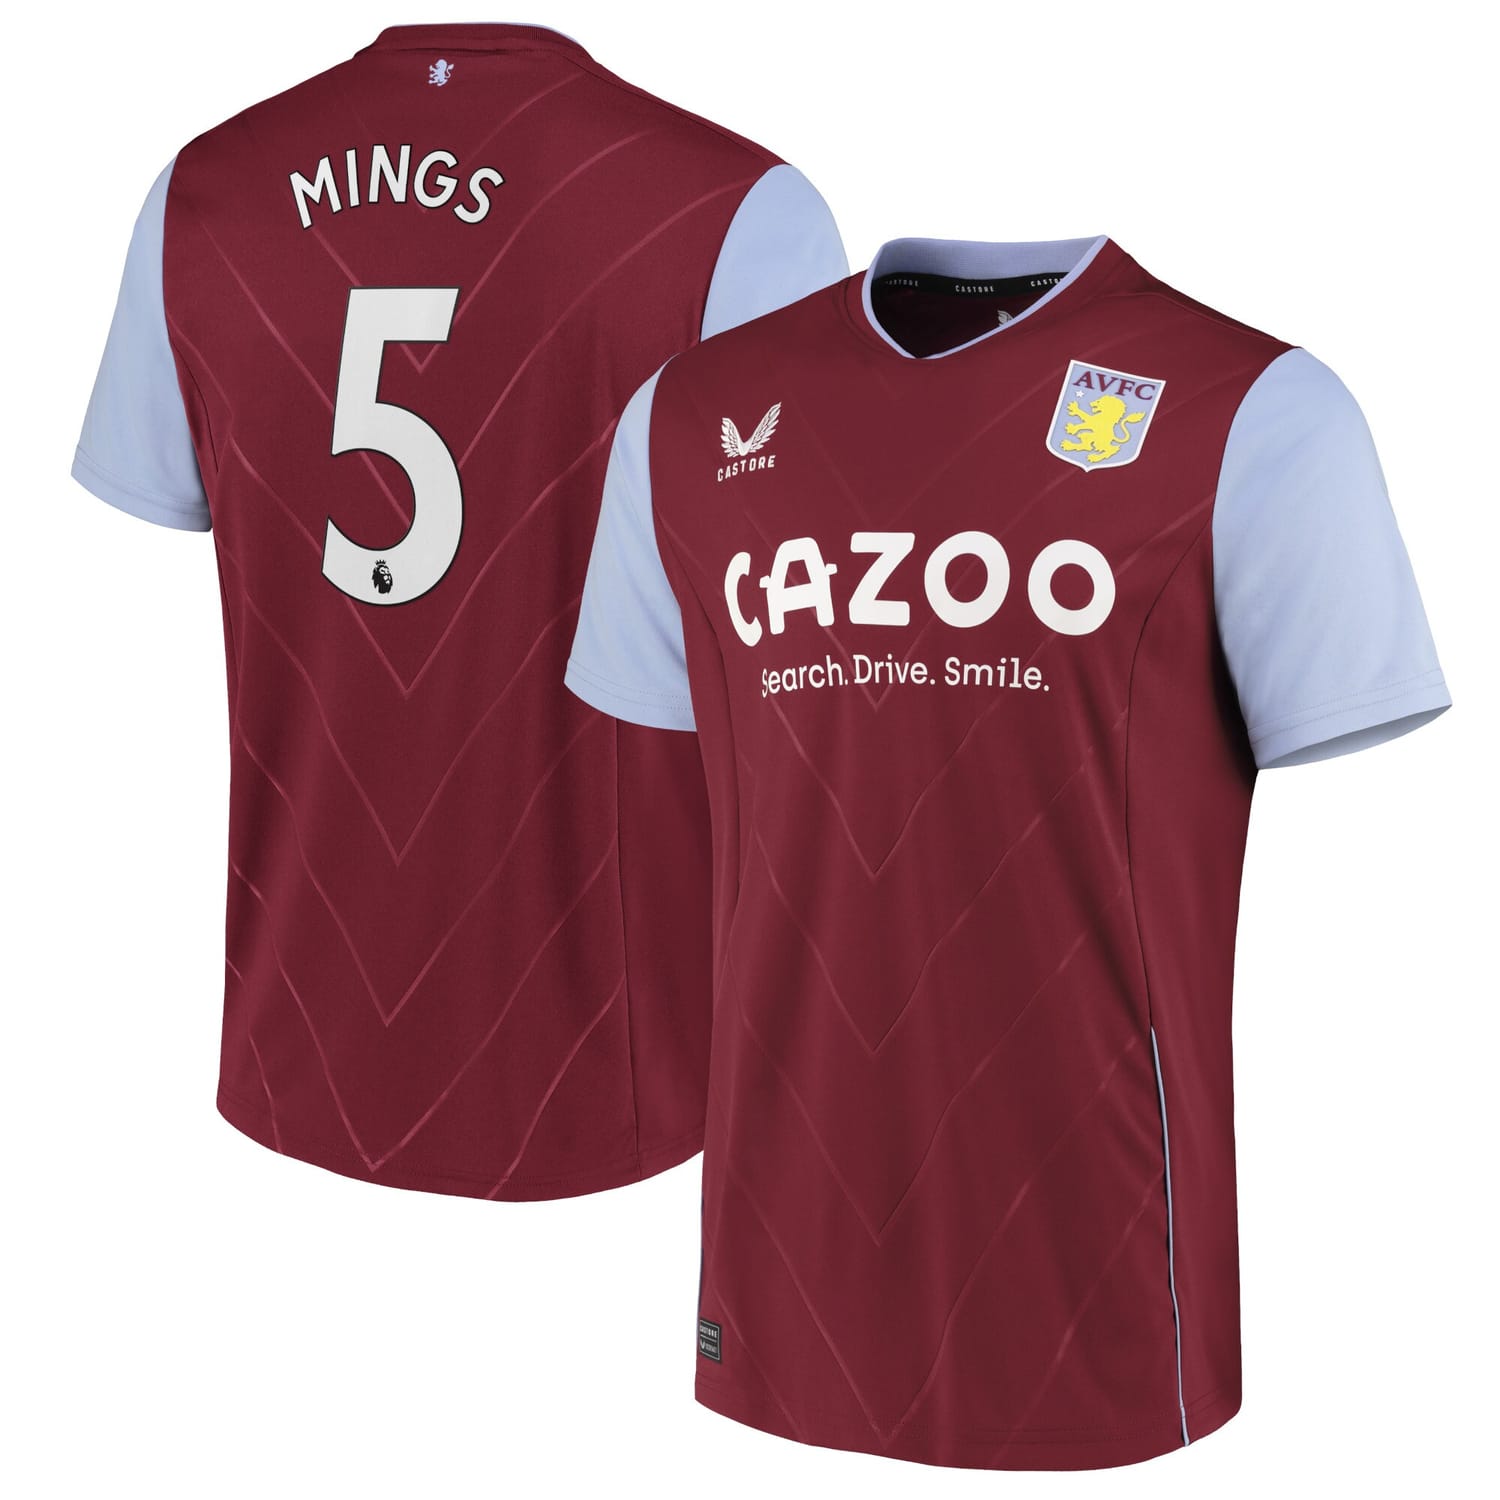 Premier League Ast. Villa Home Jersey Shirt 2022-23 player Tyrone Mings 5 printing for Men